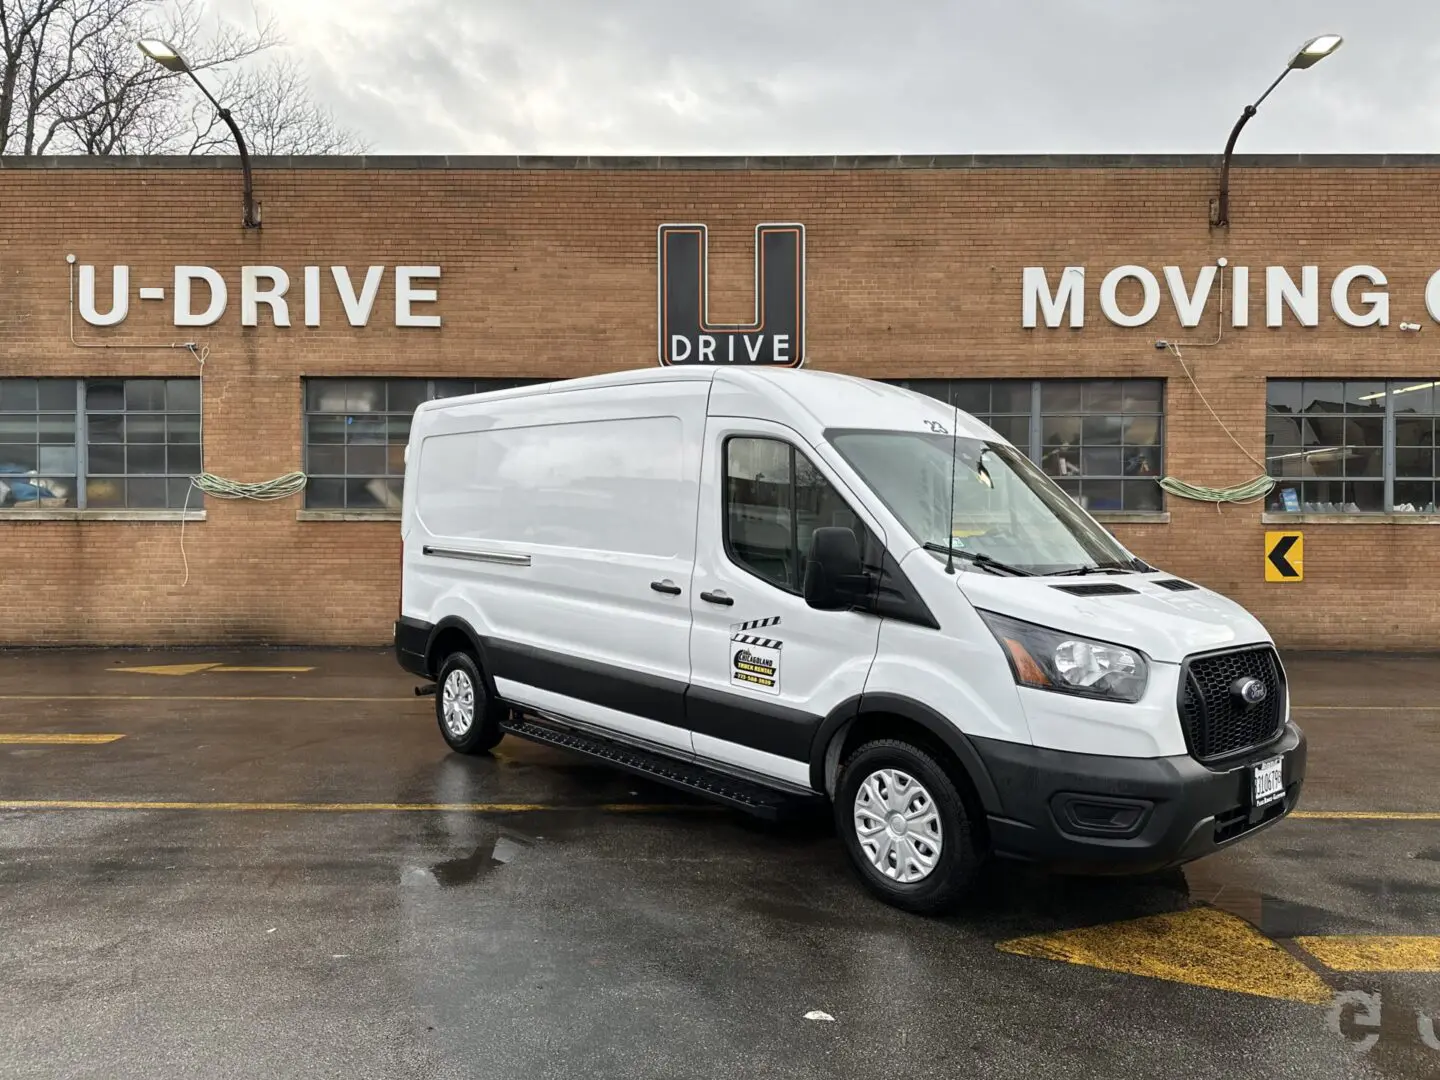 Medium Height Ford Transit Cargo Van Rentals in Chicago and nationwide